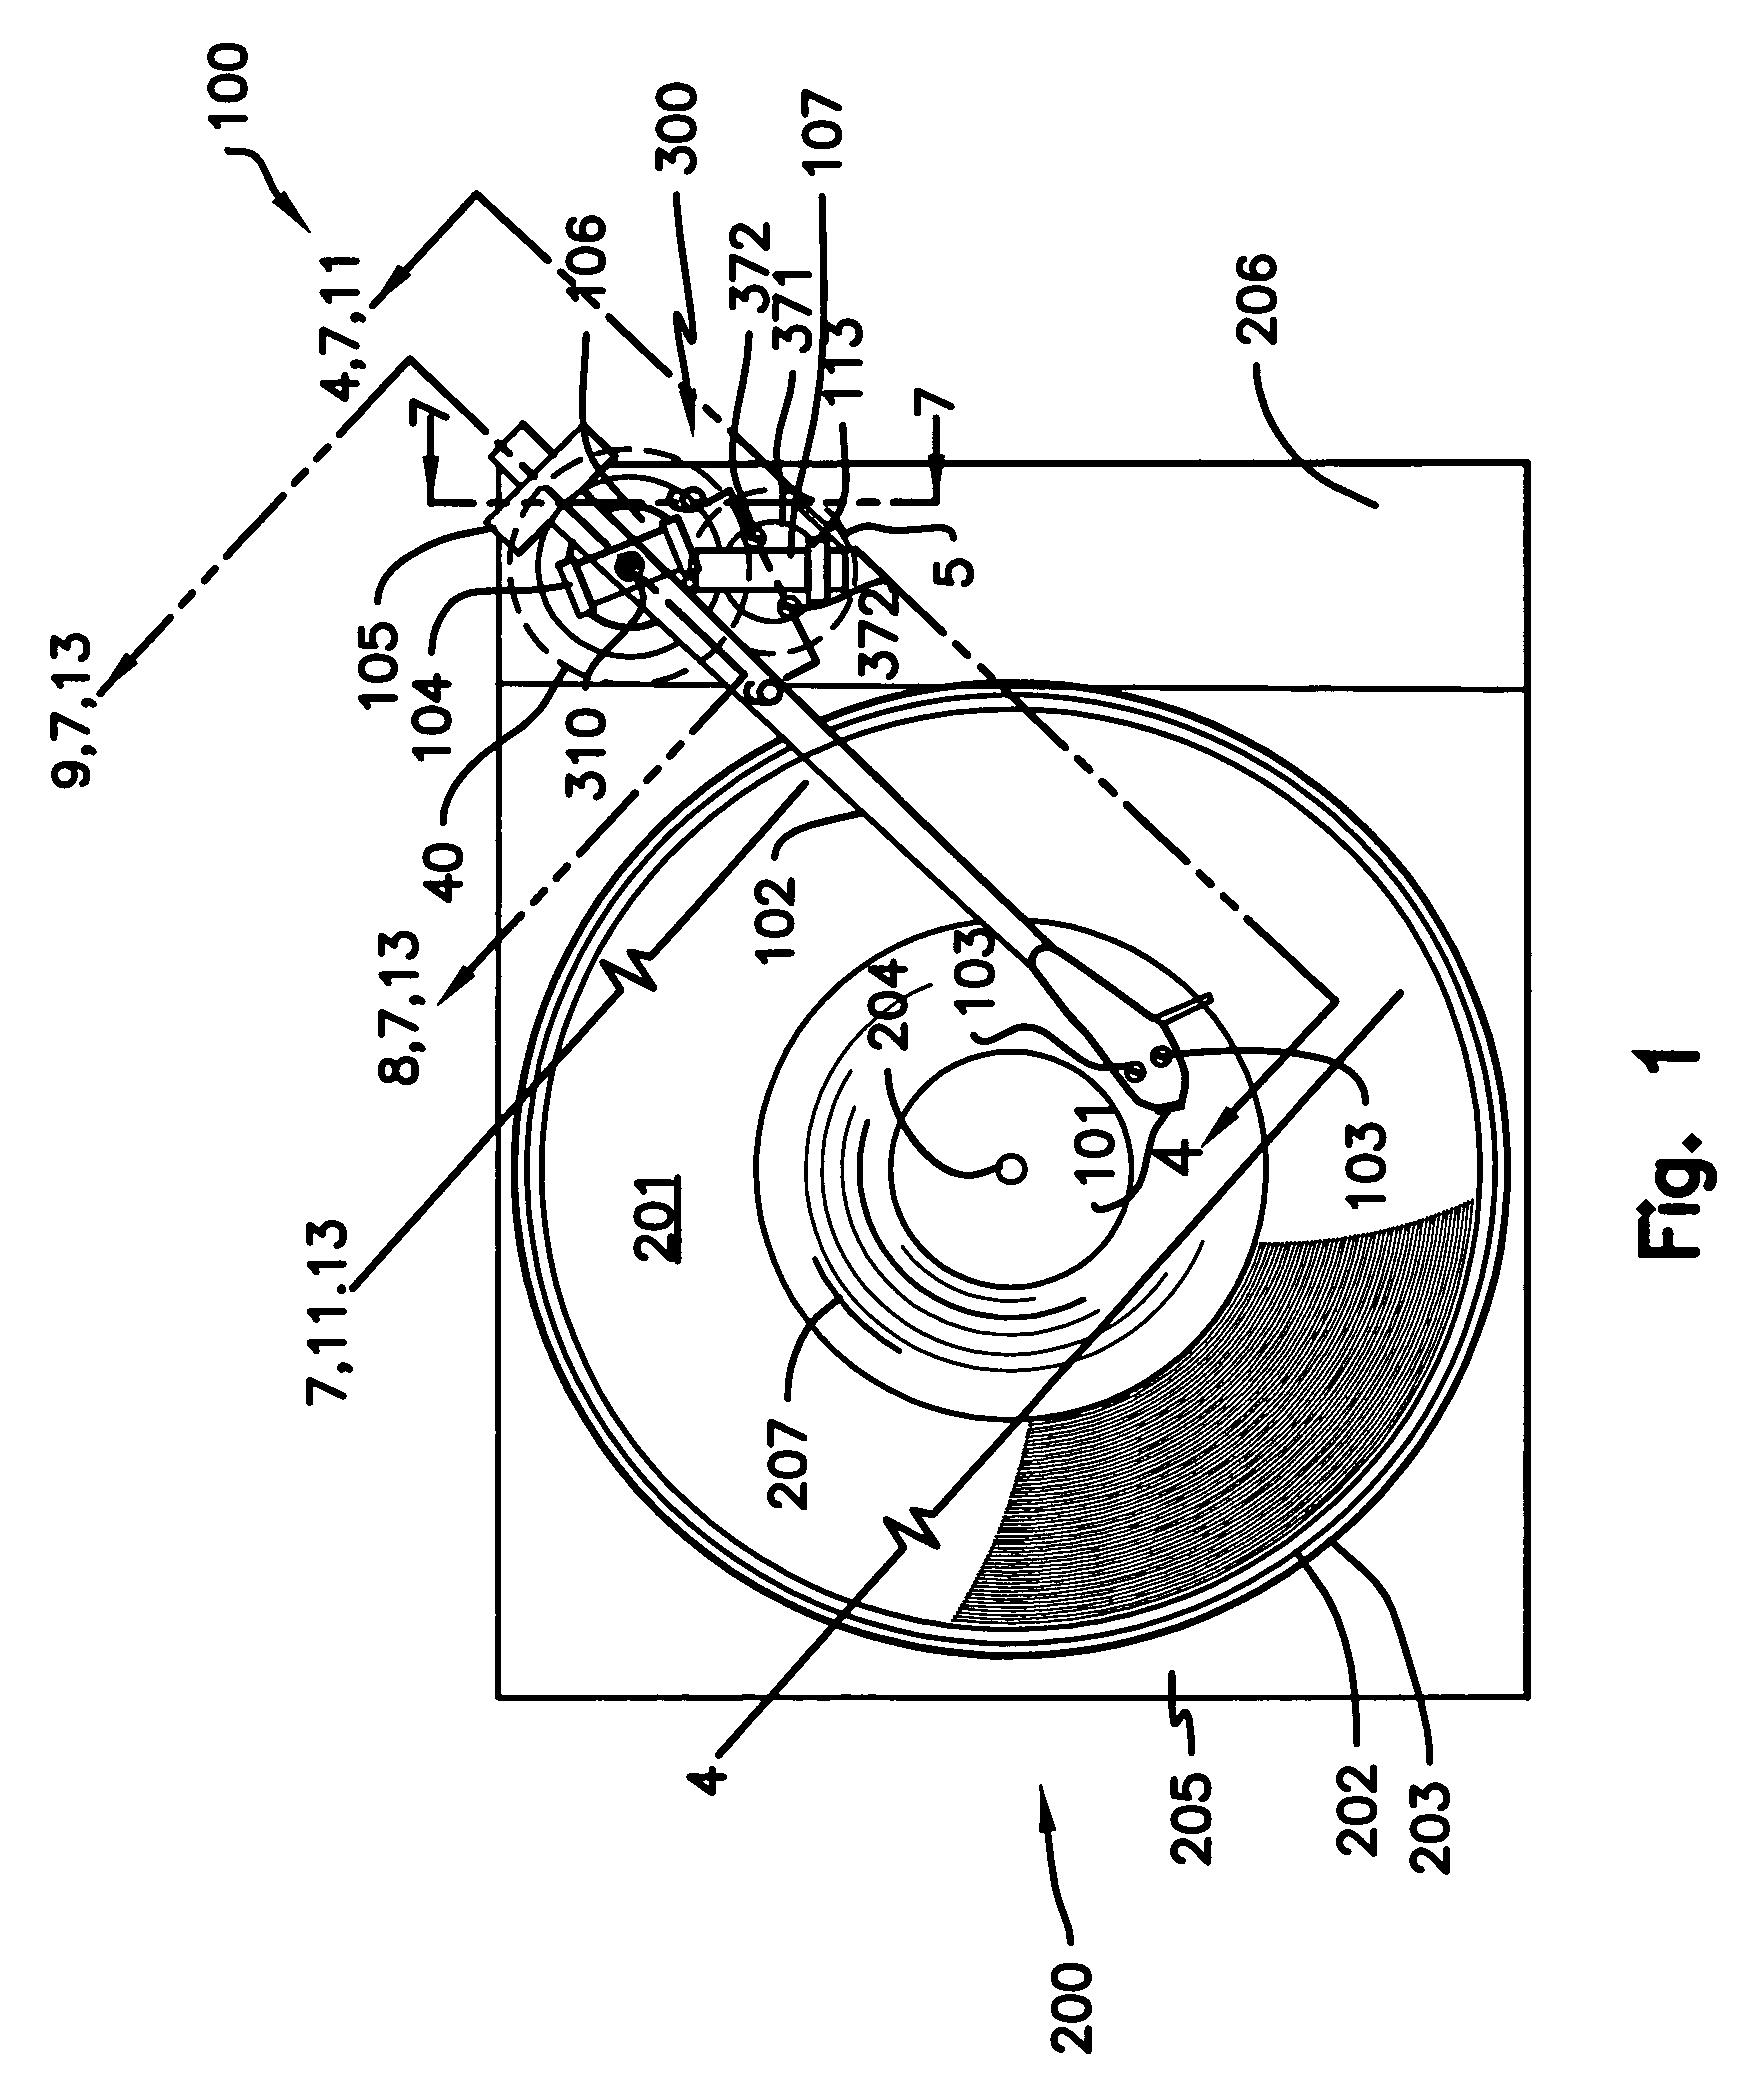 Phonograph tone arm mounting, decoupling, vertical tracking angle adjustment system, and vertical guide system